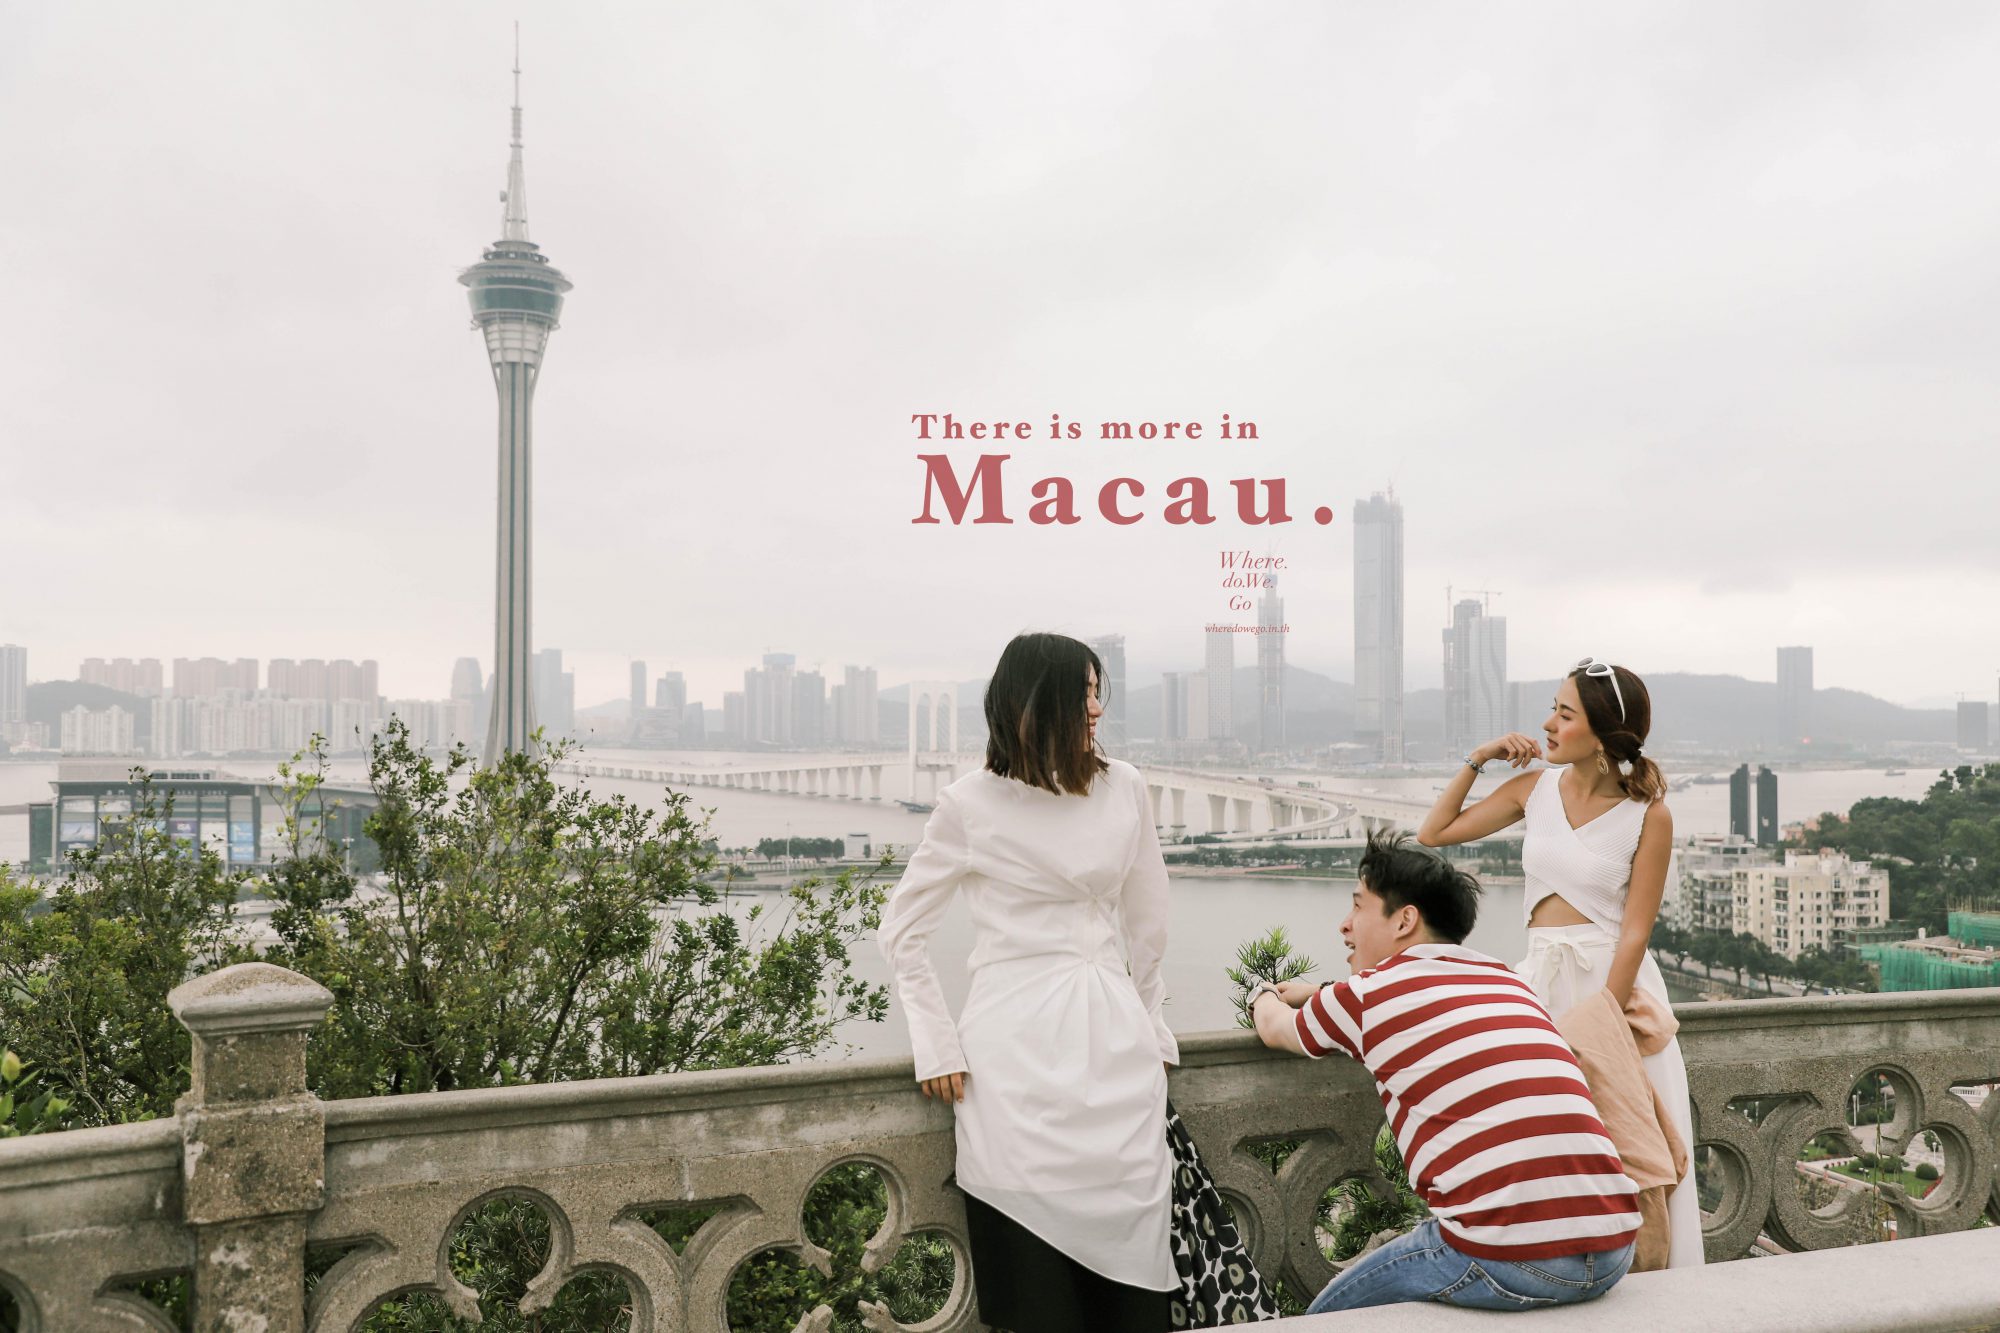 There is more in MACAU.